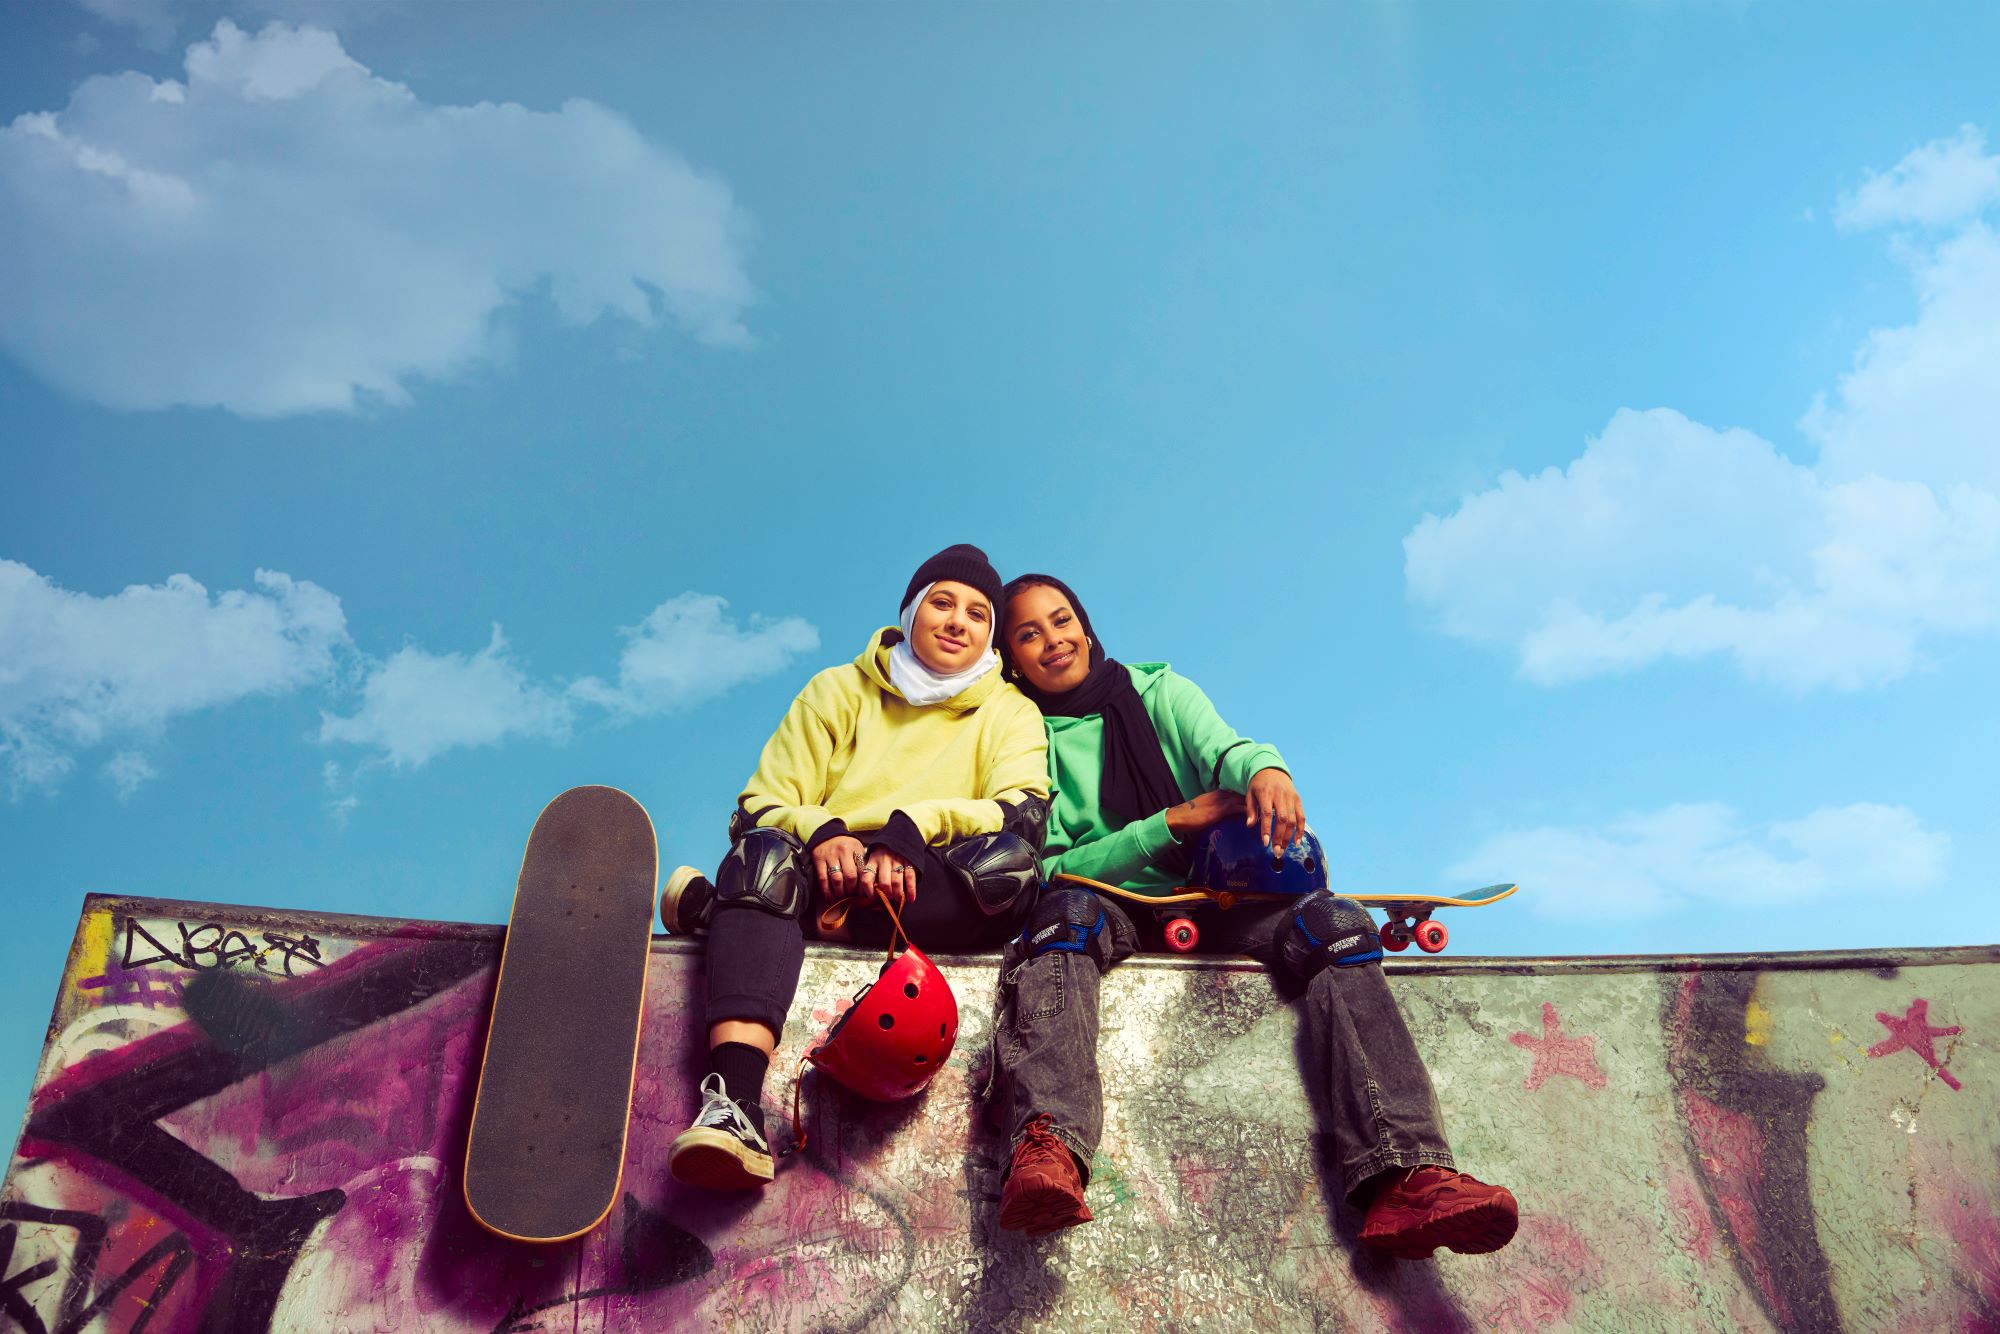 Two young women wearing hijabs, colourful hoodies and knee and elbow pads sit smiling together at the top of a skate ramp.